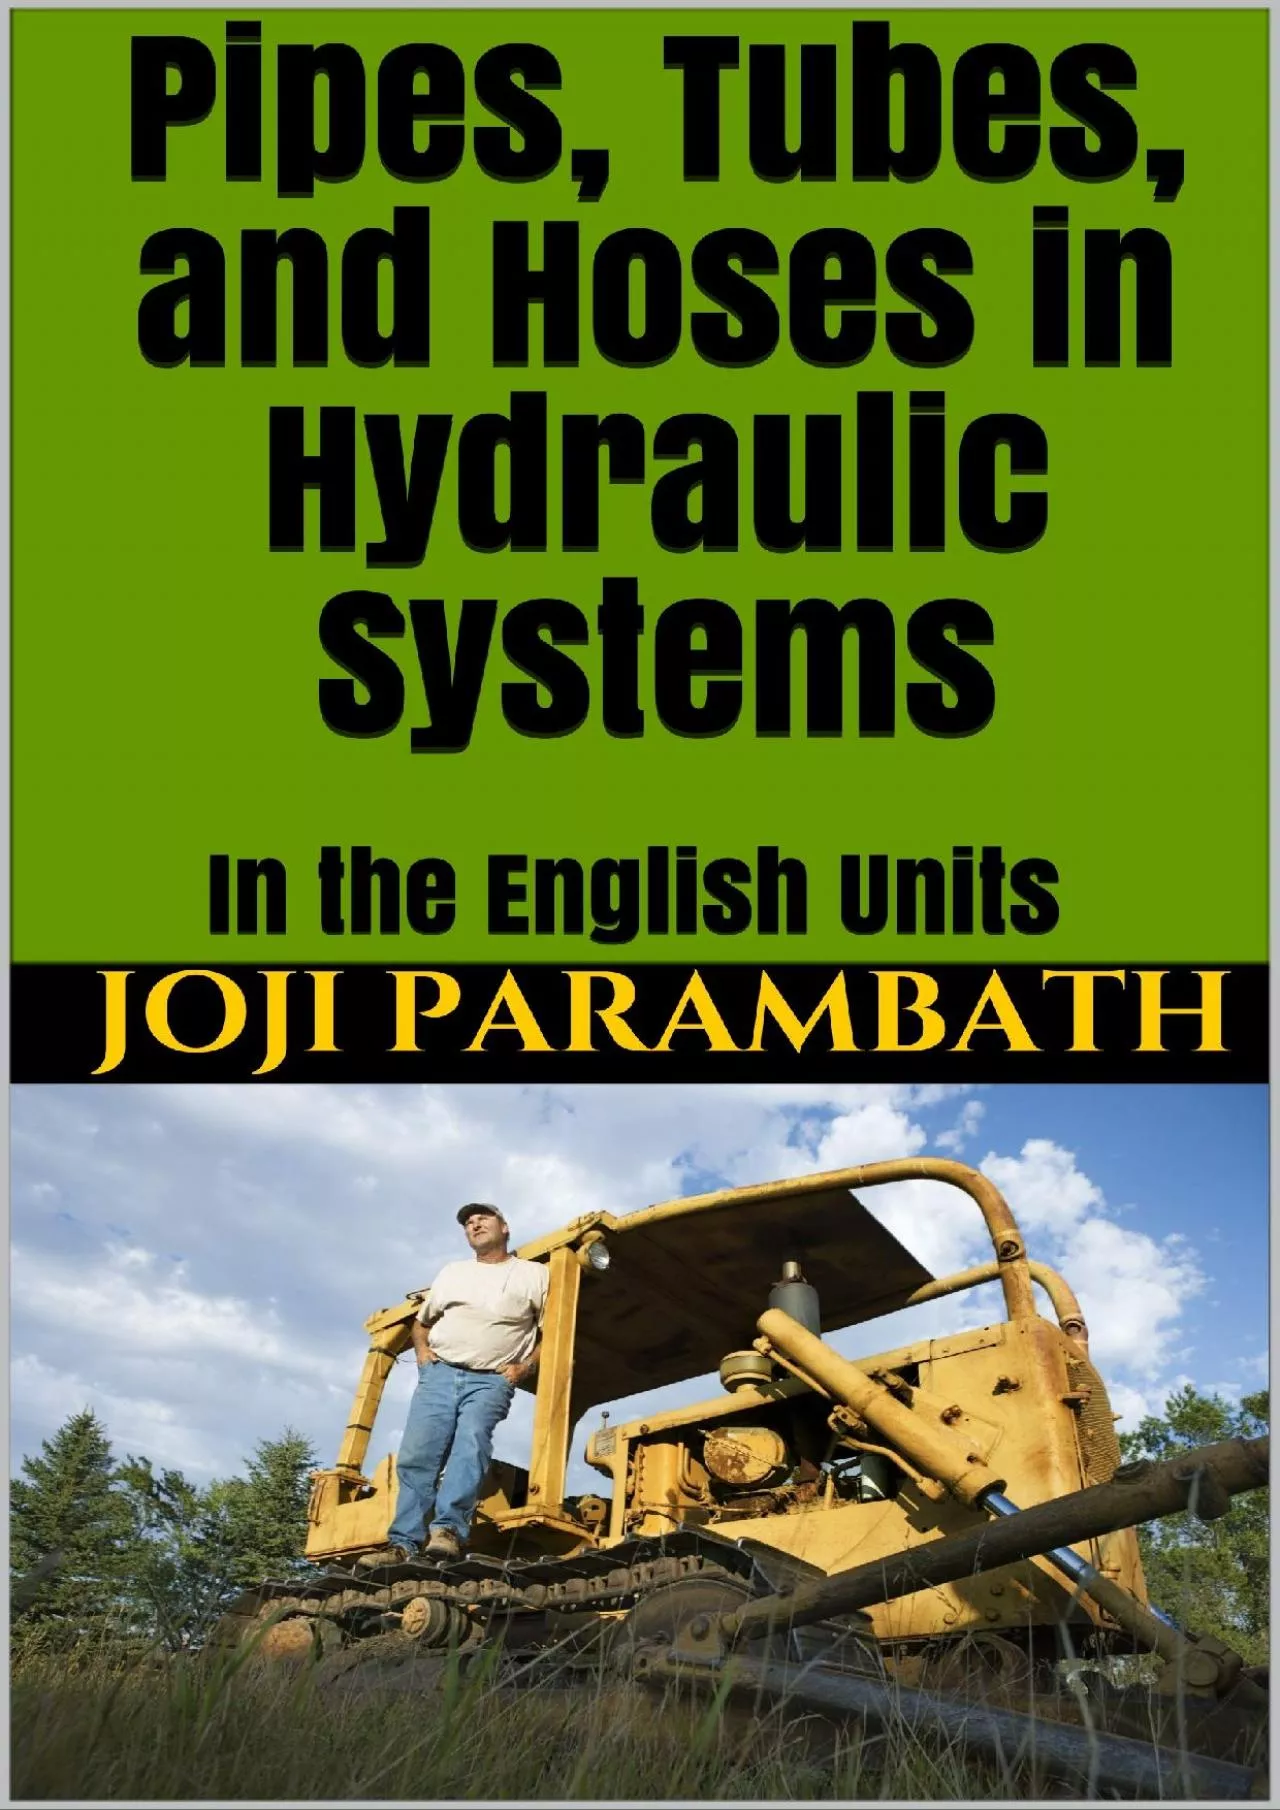 [DOWNLOAD] Pipes, Tubes, and Hoses in Hydraulic Systems: In the English Units Industrial